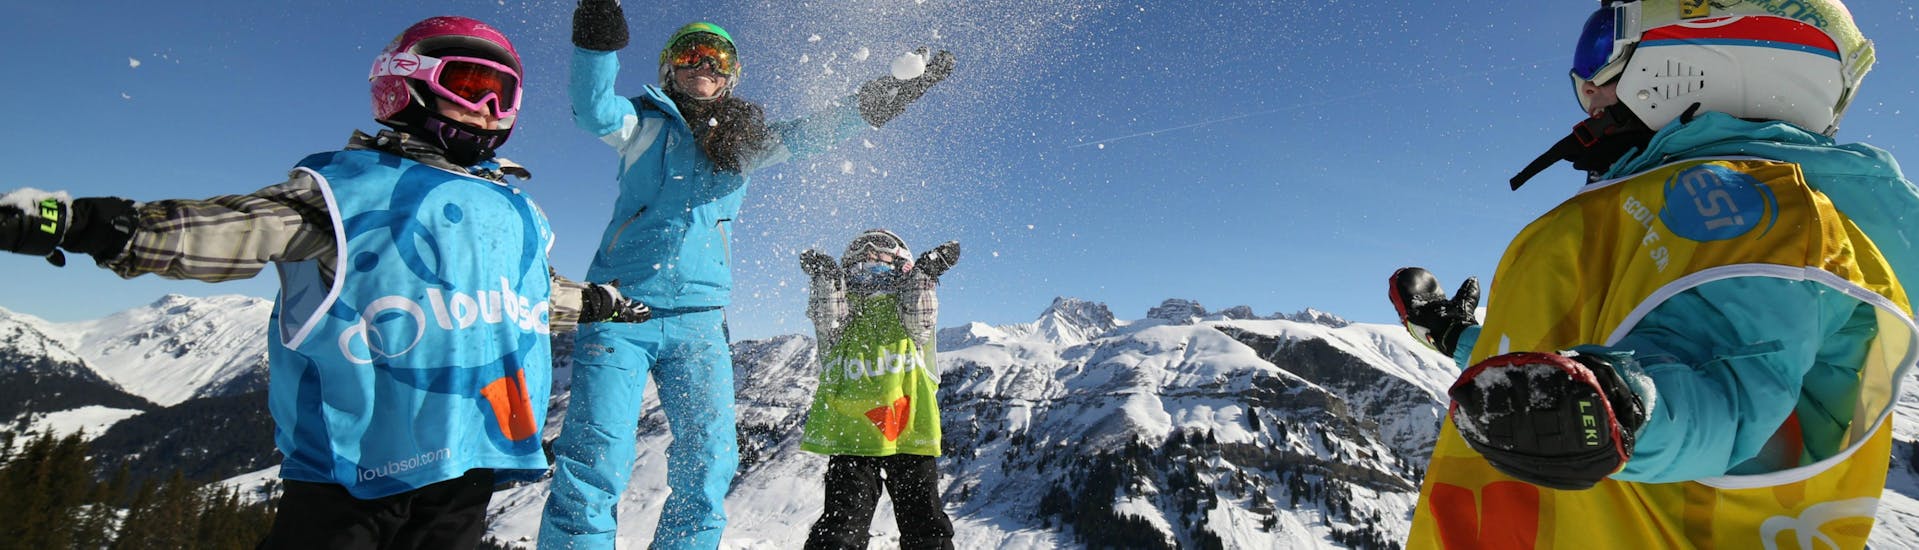 Kids are doing Kids Ski Lessons (6-13 y.) for Beginners - Holidays with our partner ESI St Christophe Les Deux Alpes.